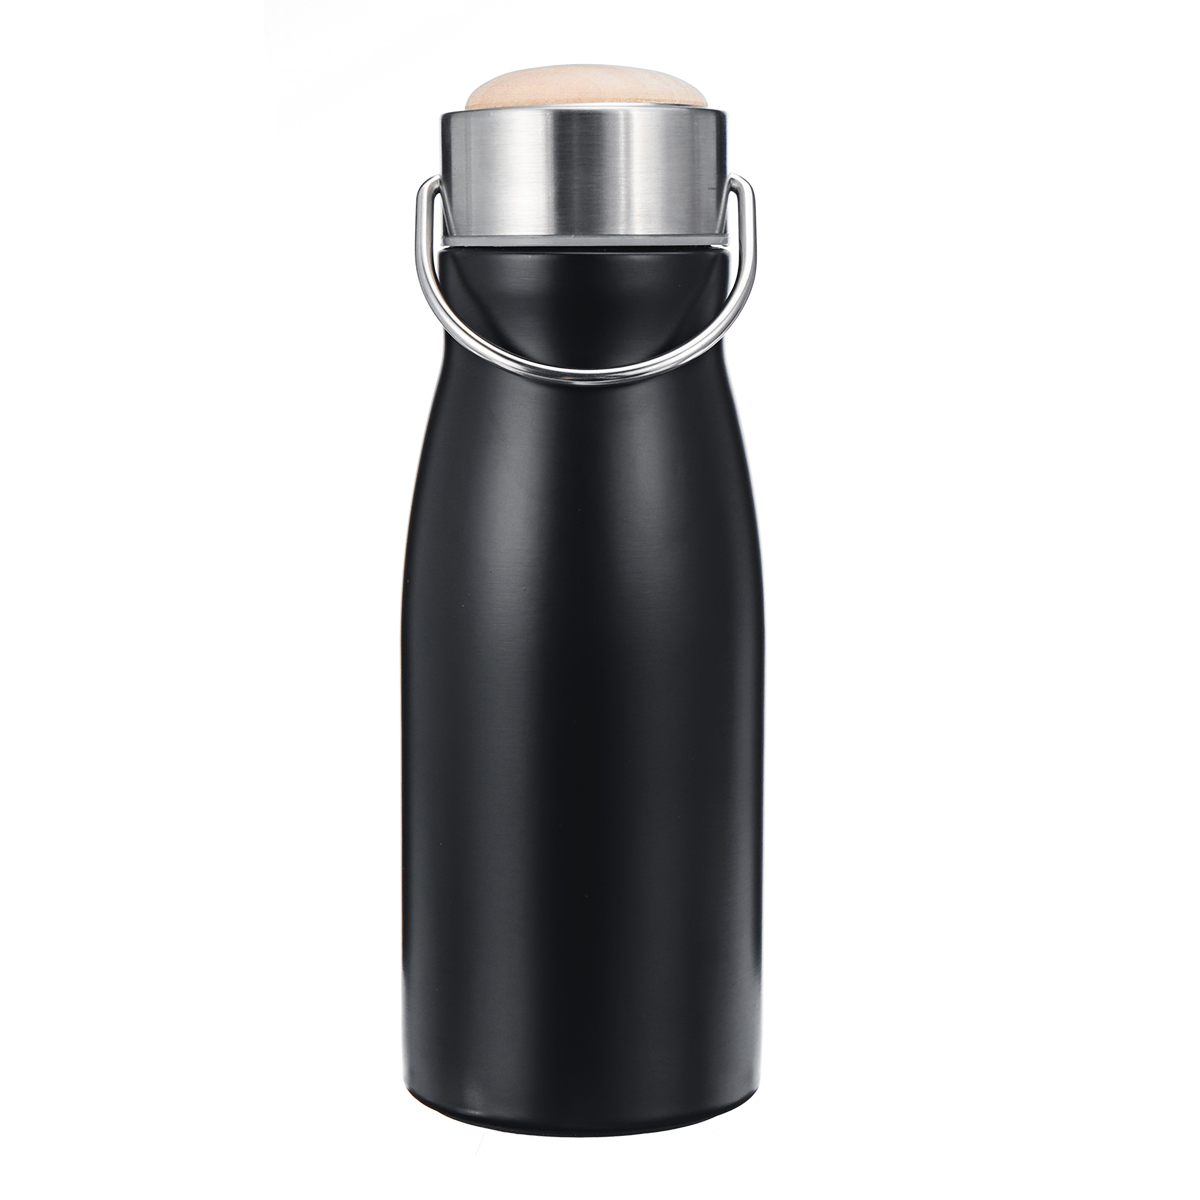 

360ml Stainless Steel Water Bottle Vacuum Cup Insulation Bottle Travel Camping